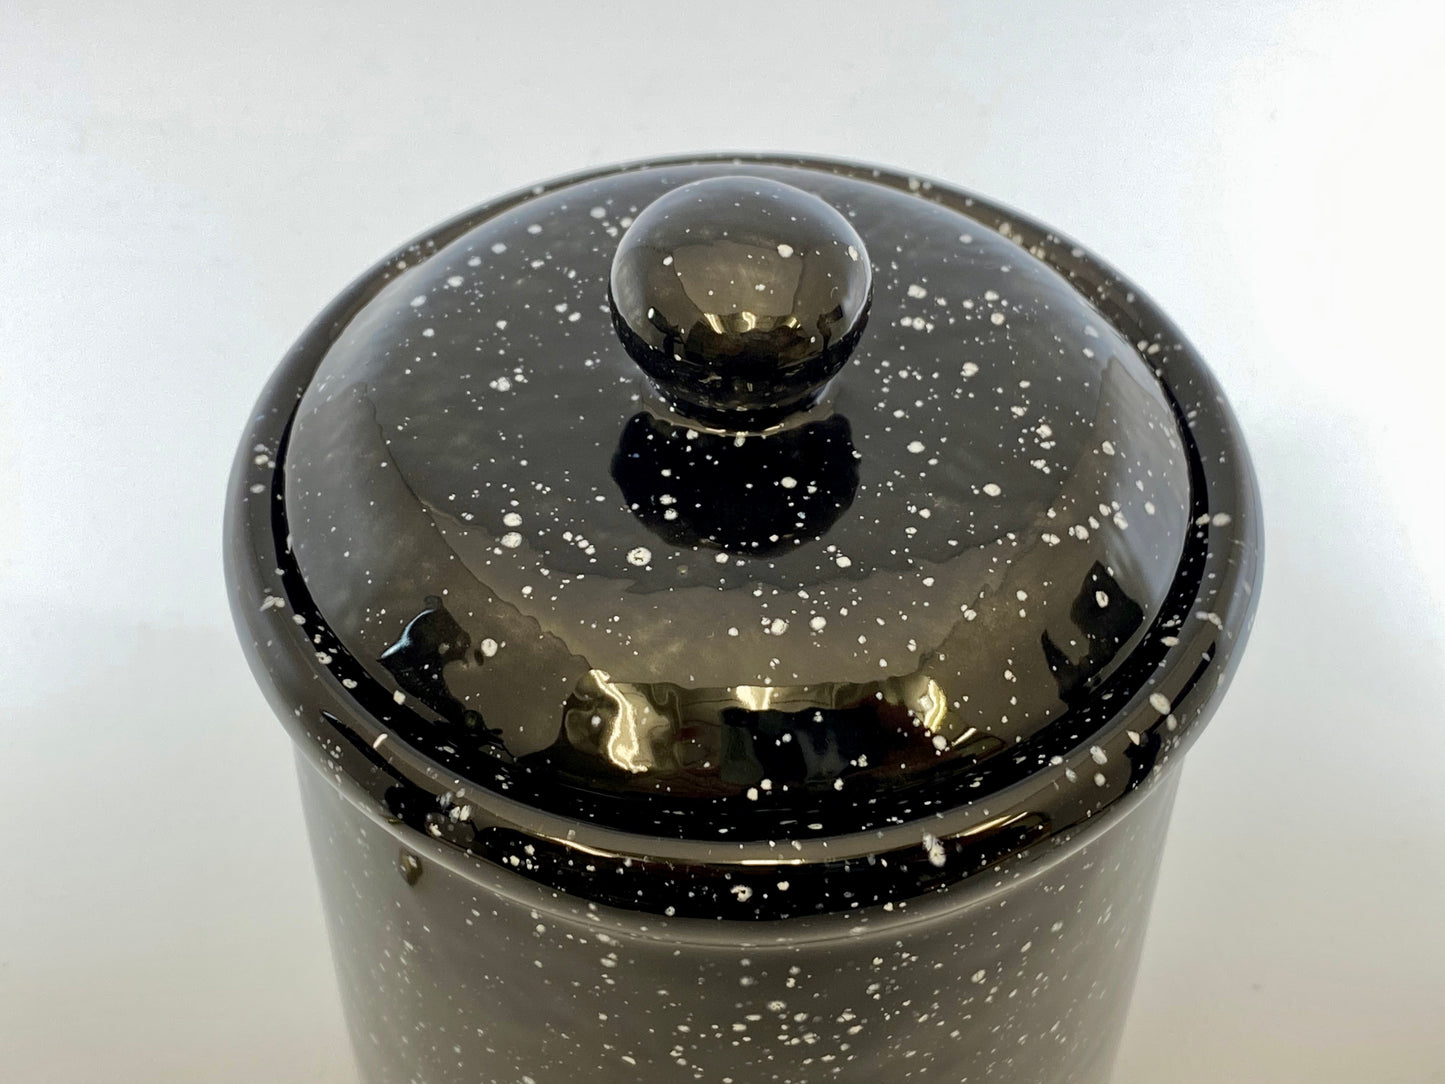 Speckled Black Canister for Tea or Coffee - PeterBowenArt